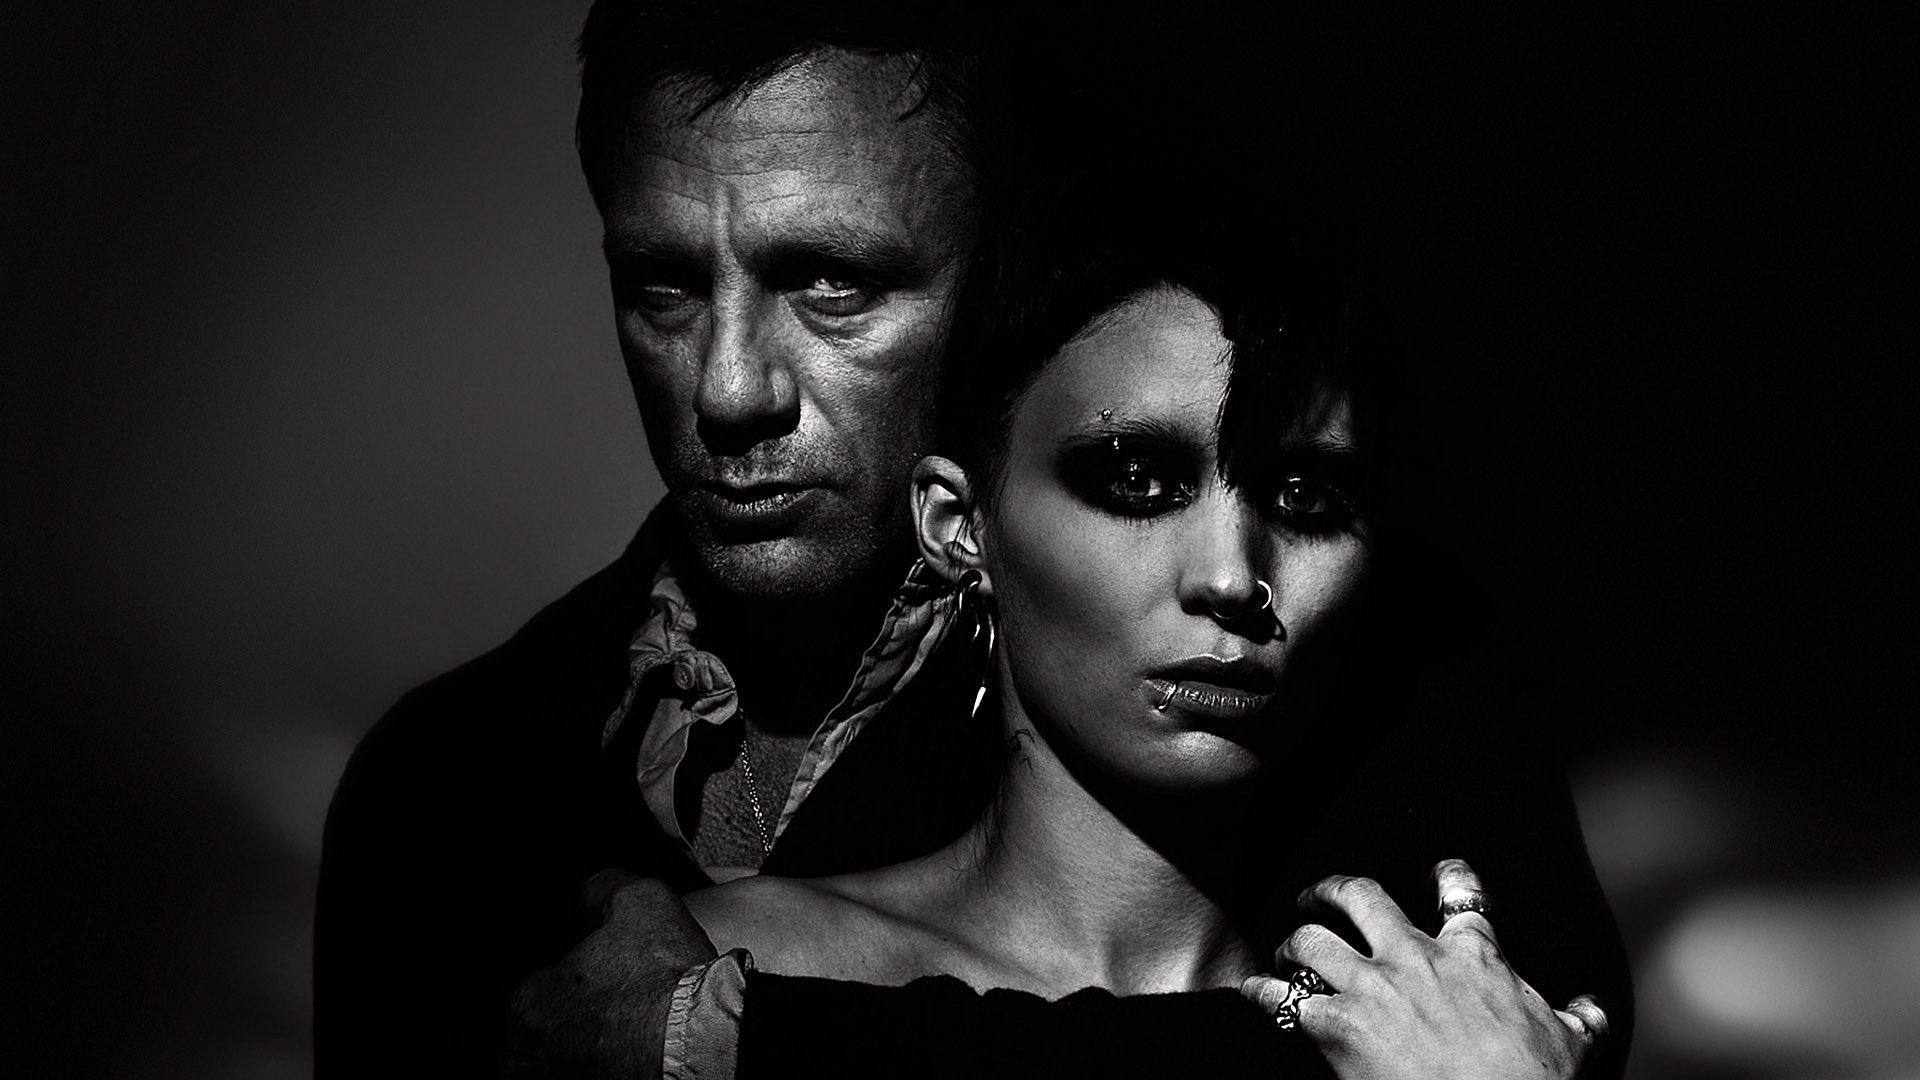 The Girl With The Dragon Tattoo HD Wallpaper. Background Image